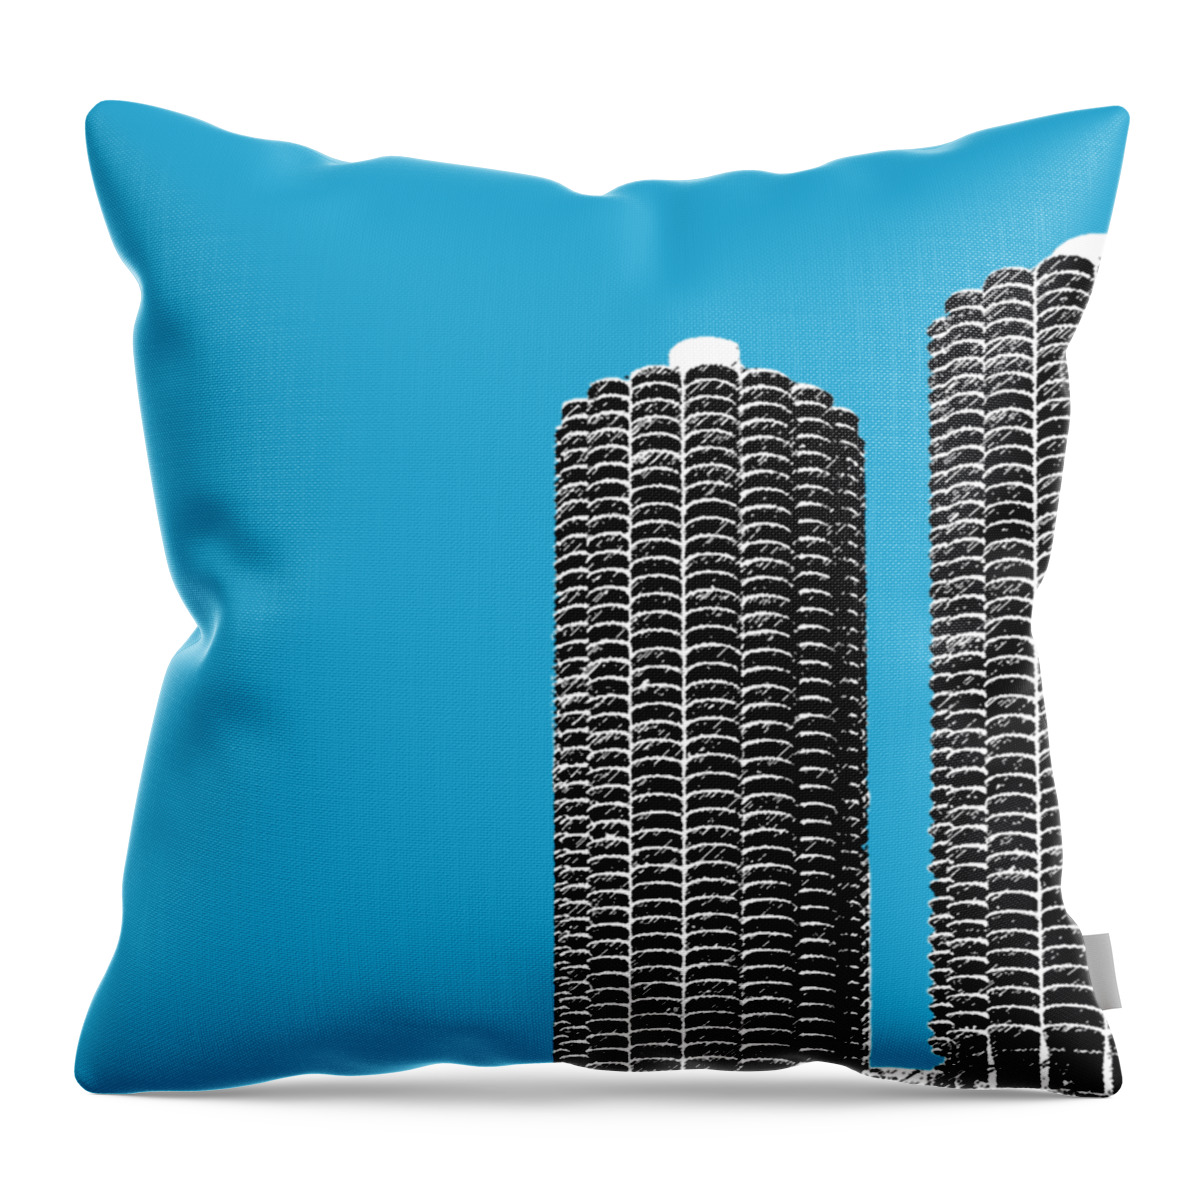 Architecture Throw Pillow featuring the digital art Chicago Skyline Marina Towers - Teal by DB Artist